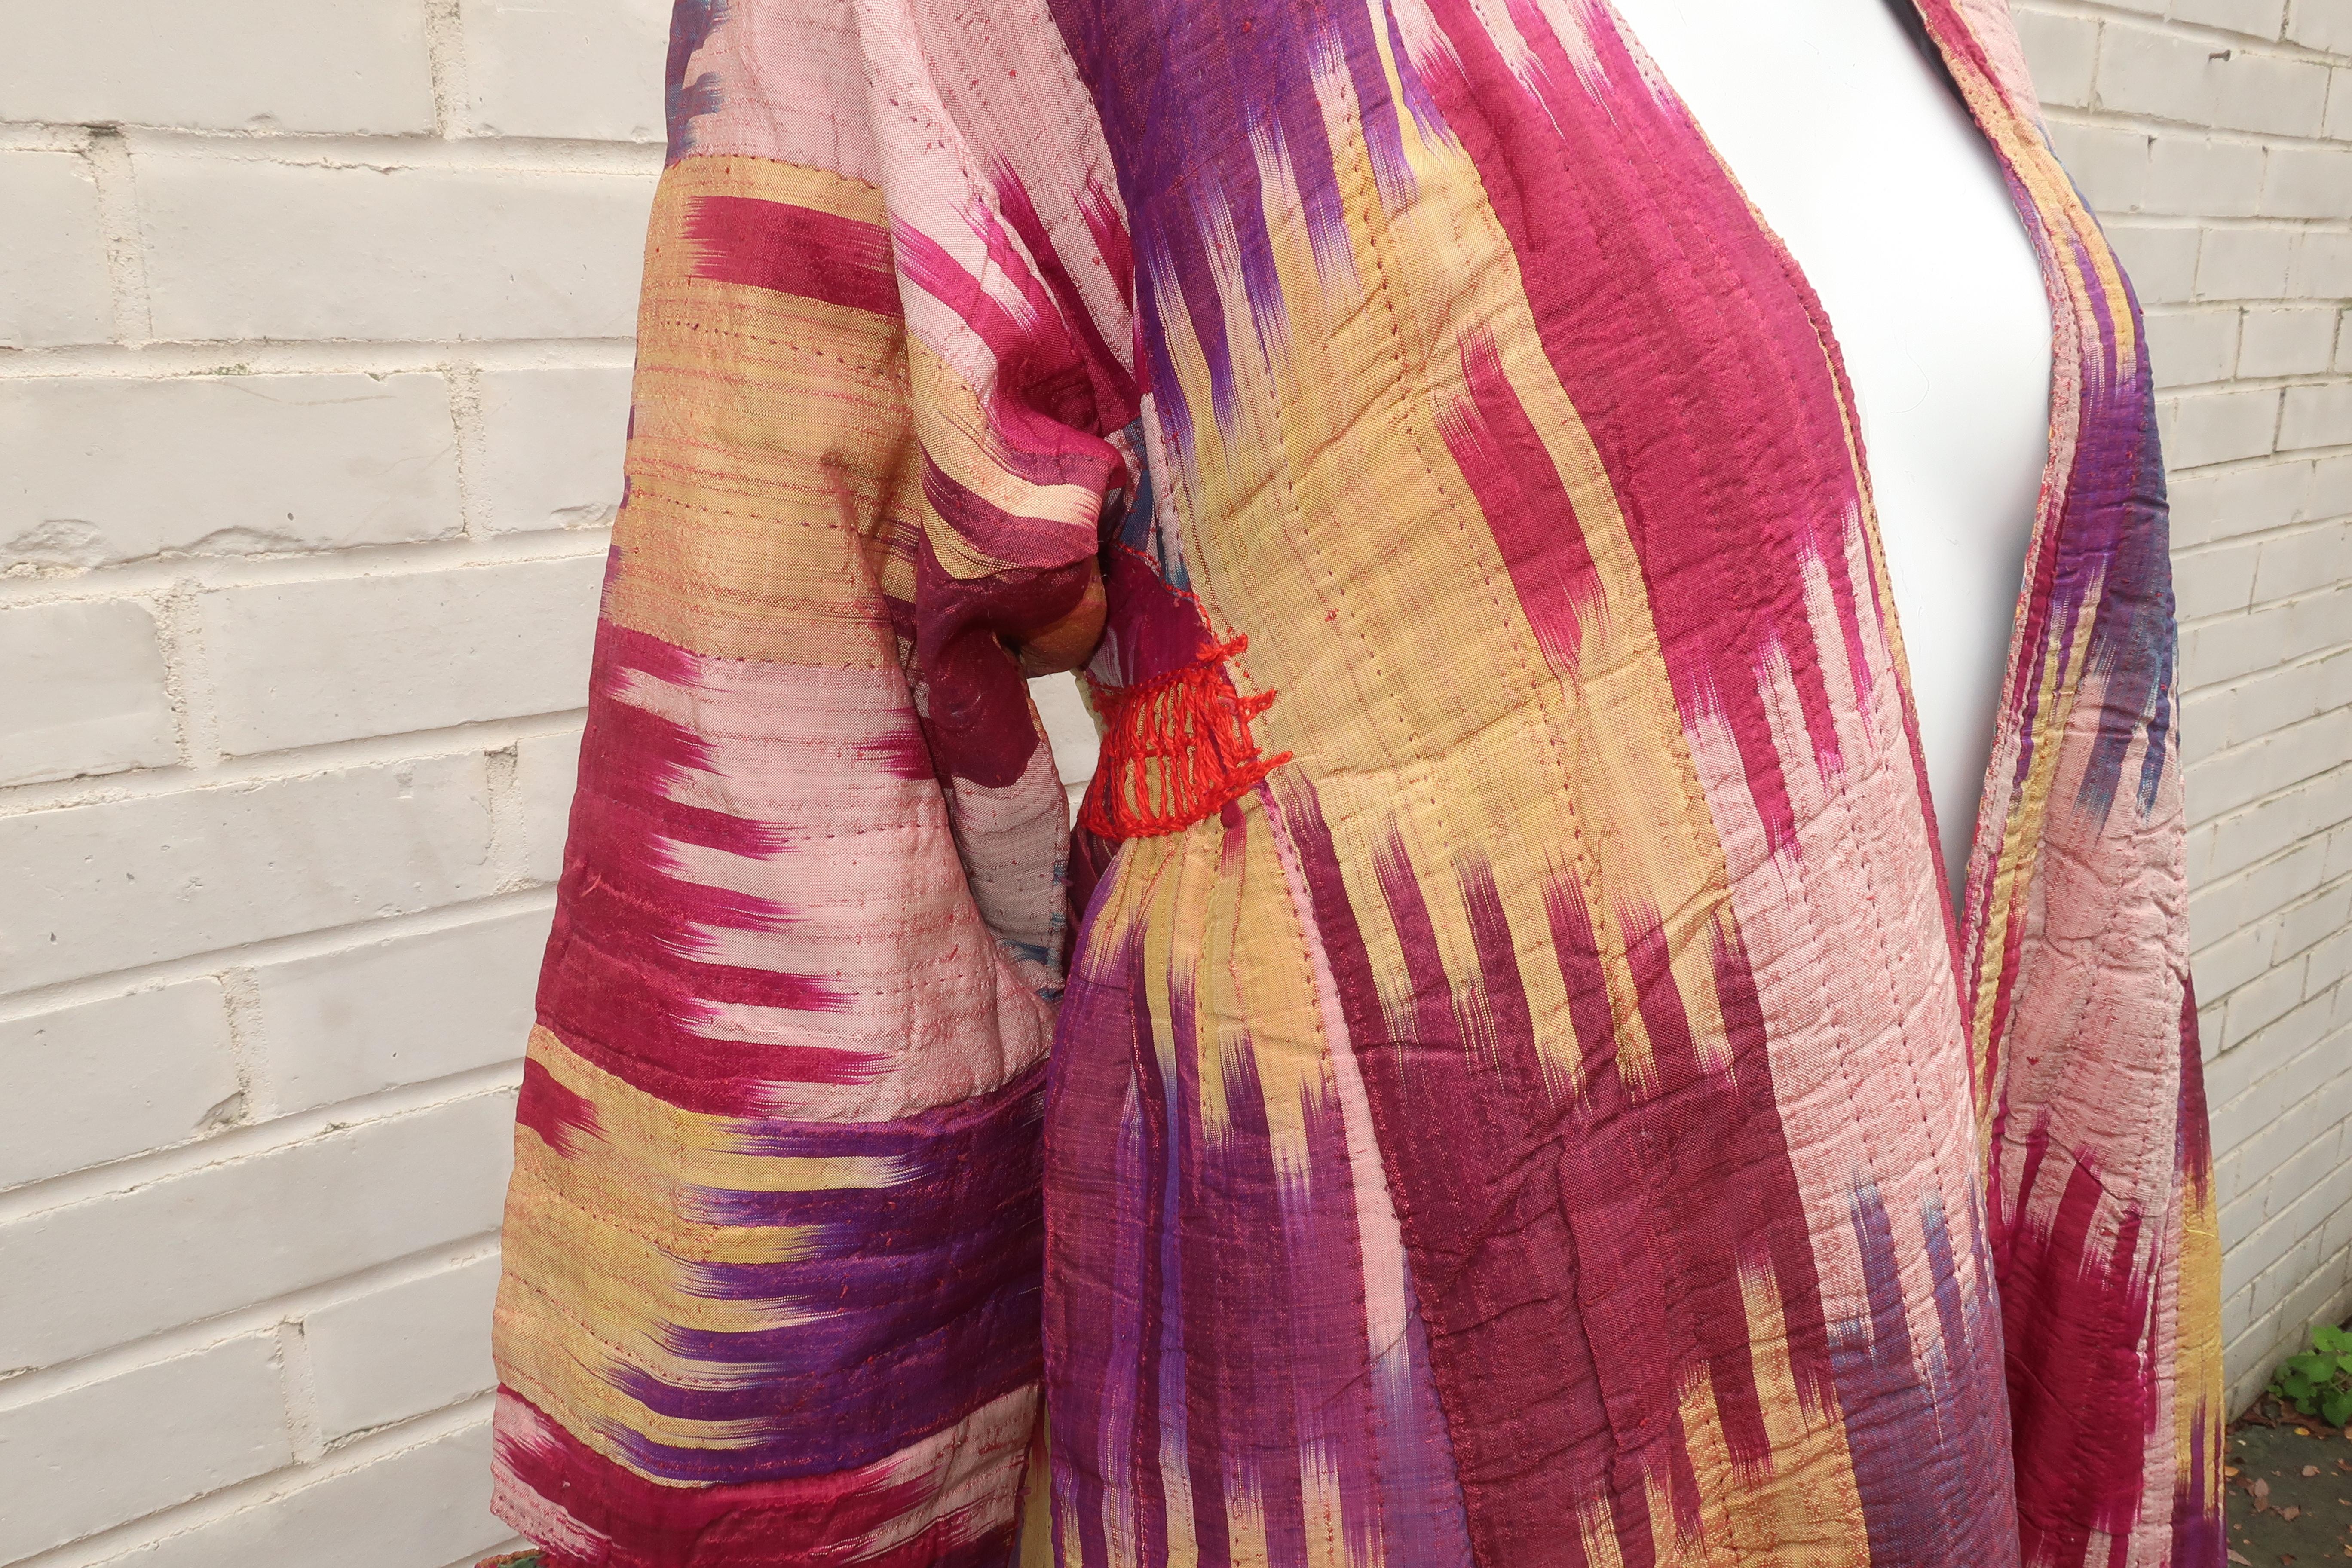 Mid 20th Century Central Asian Quilted Silk Ikat Chapan Robe Coat In Good Condition For Sale In Atlanta, GA